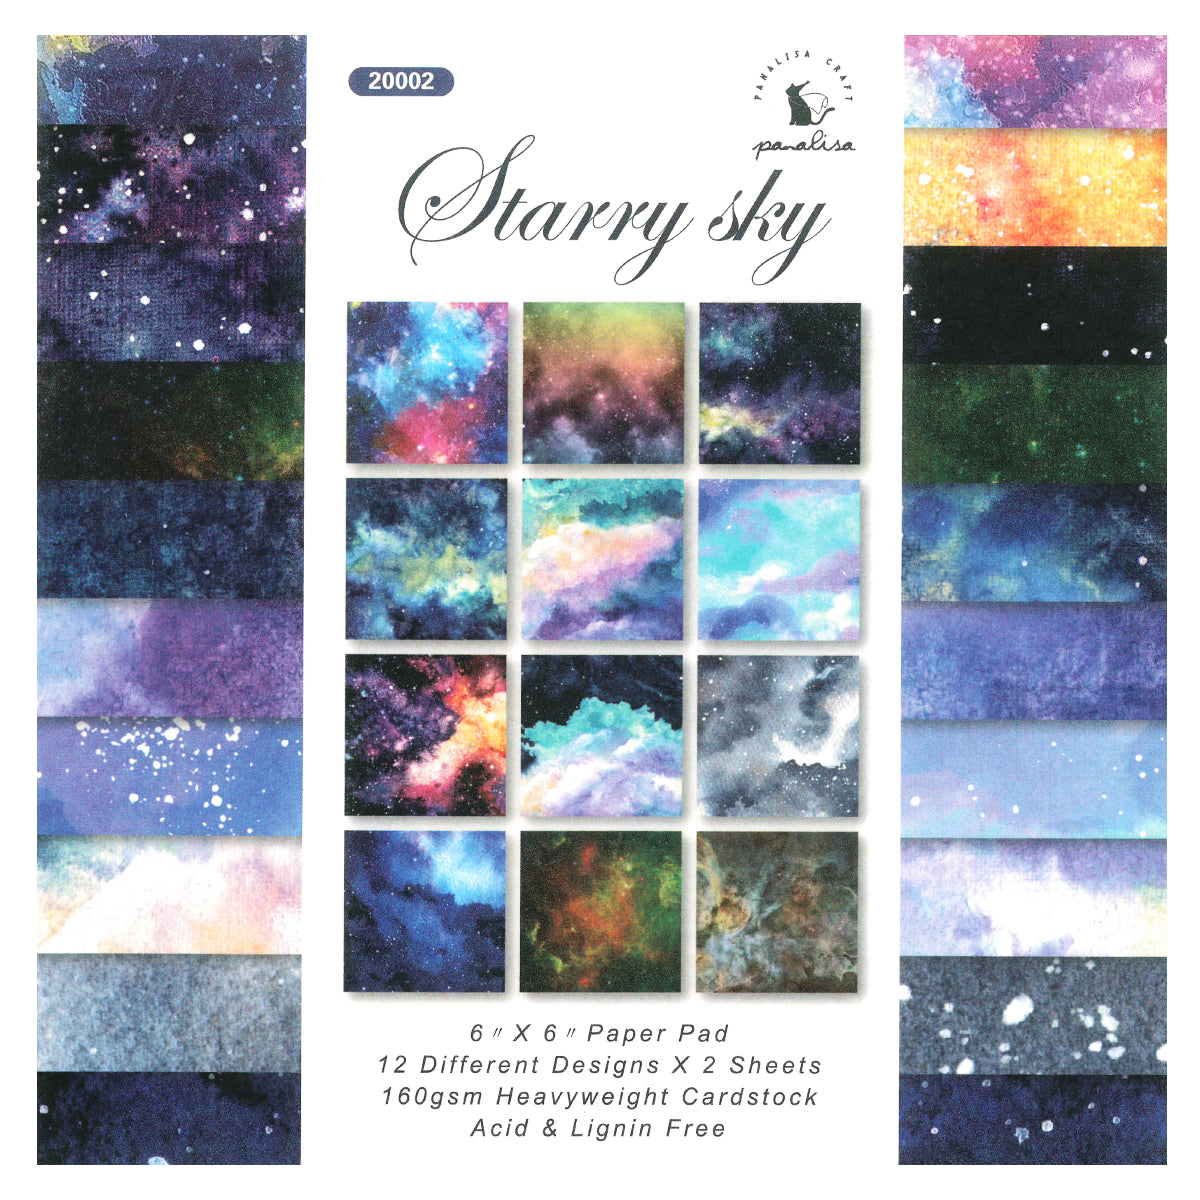 Wrapables 6x6 Decorative Single-Sided Scrapbook Paper for Arts & Crafts Projects, Scrapbooking, Card-Making